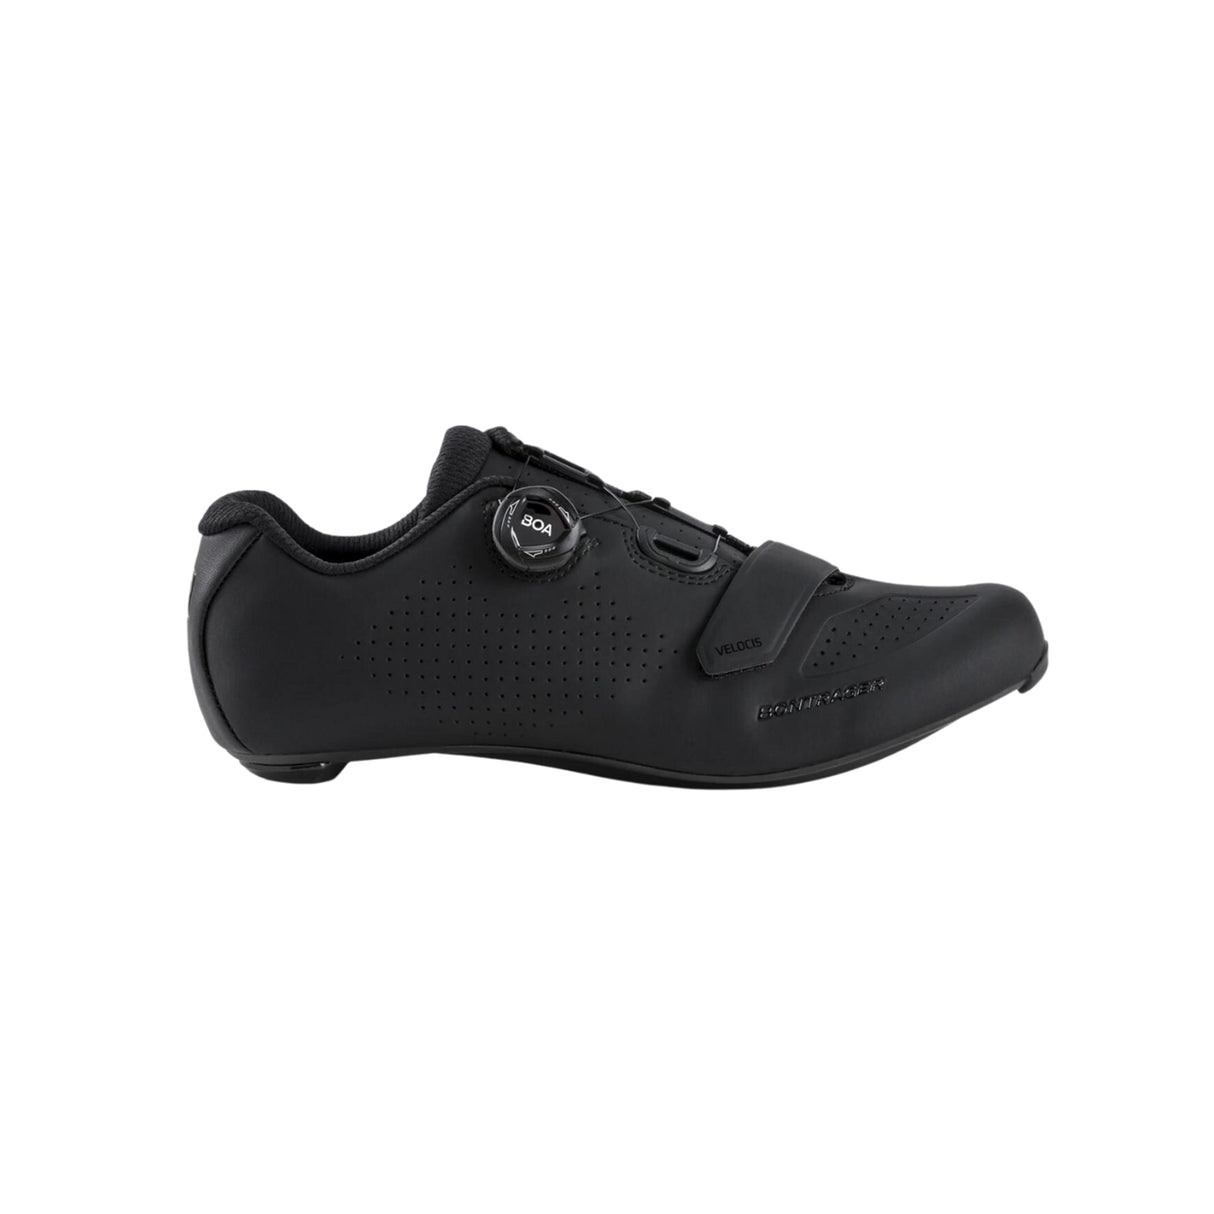 Bontrager Velocis Wide Road Cycling Shoe